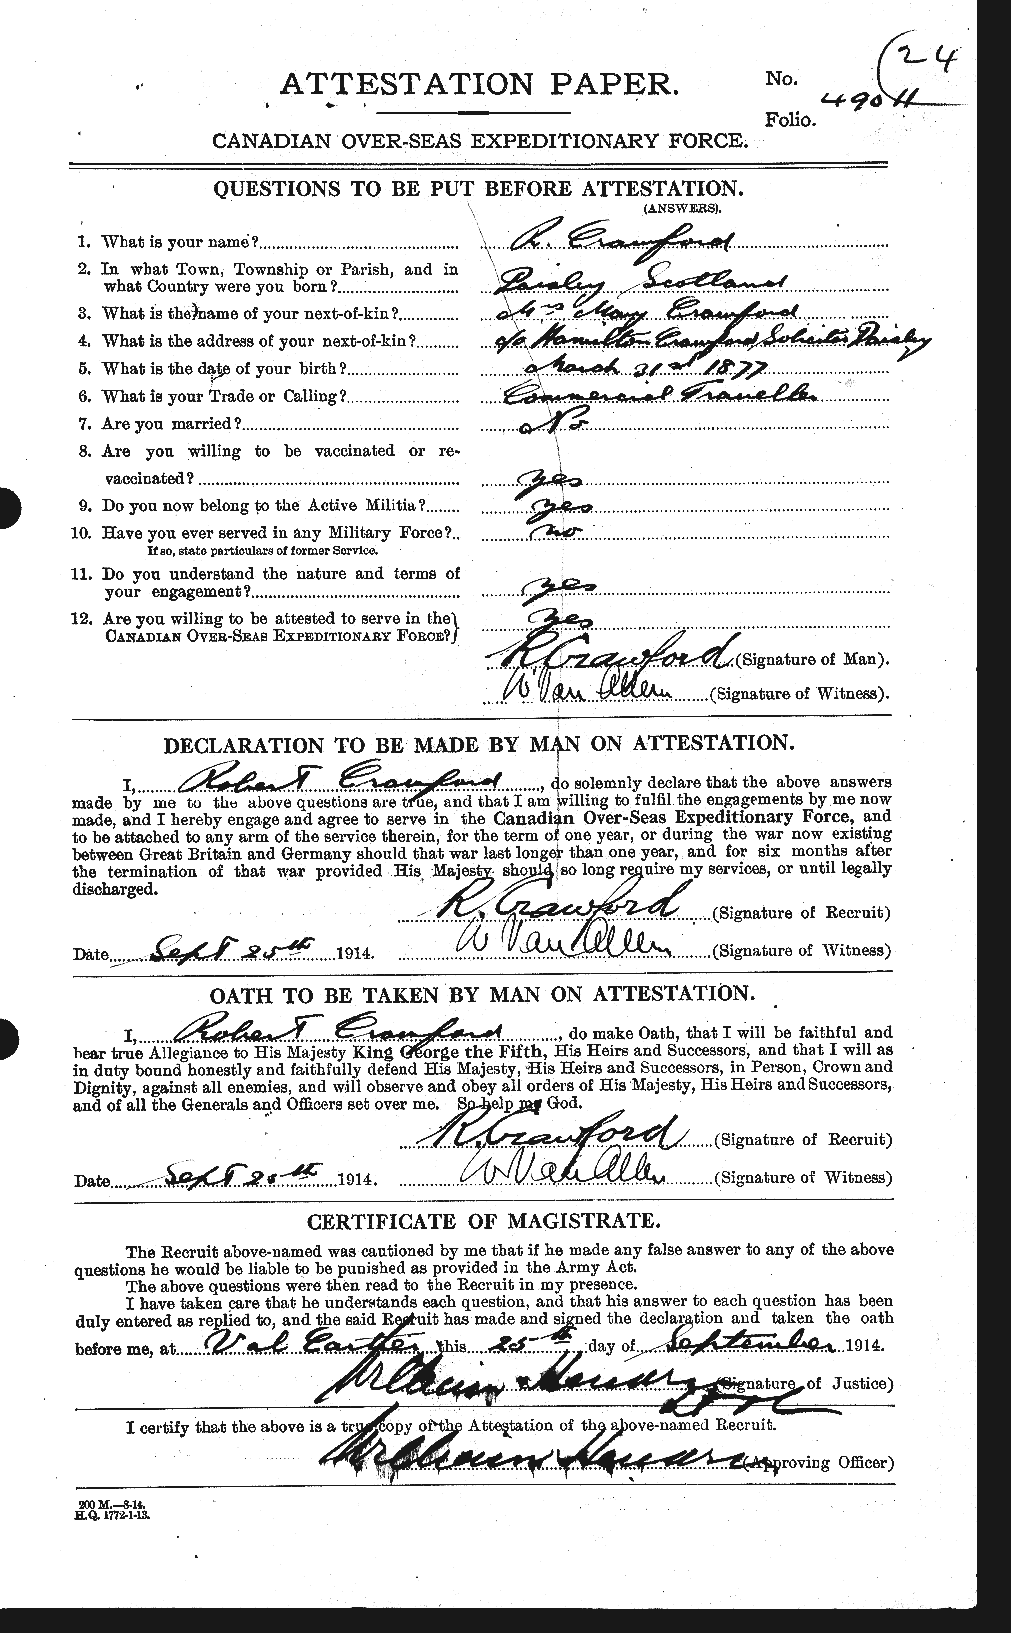 Personnel Records of the First World War - CEF 061651a